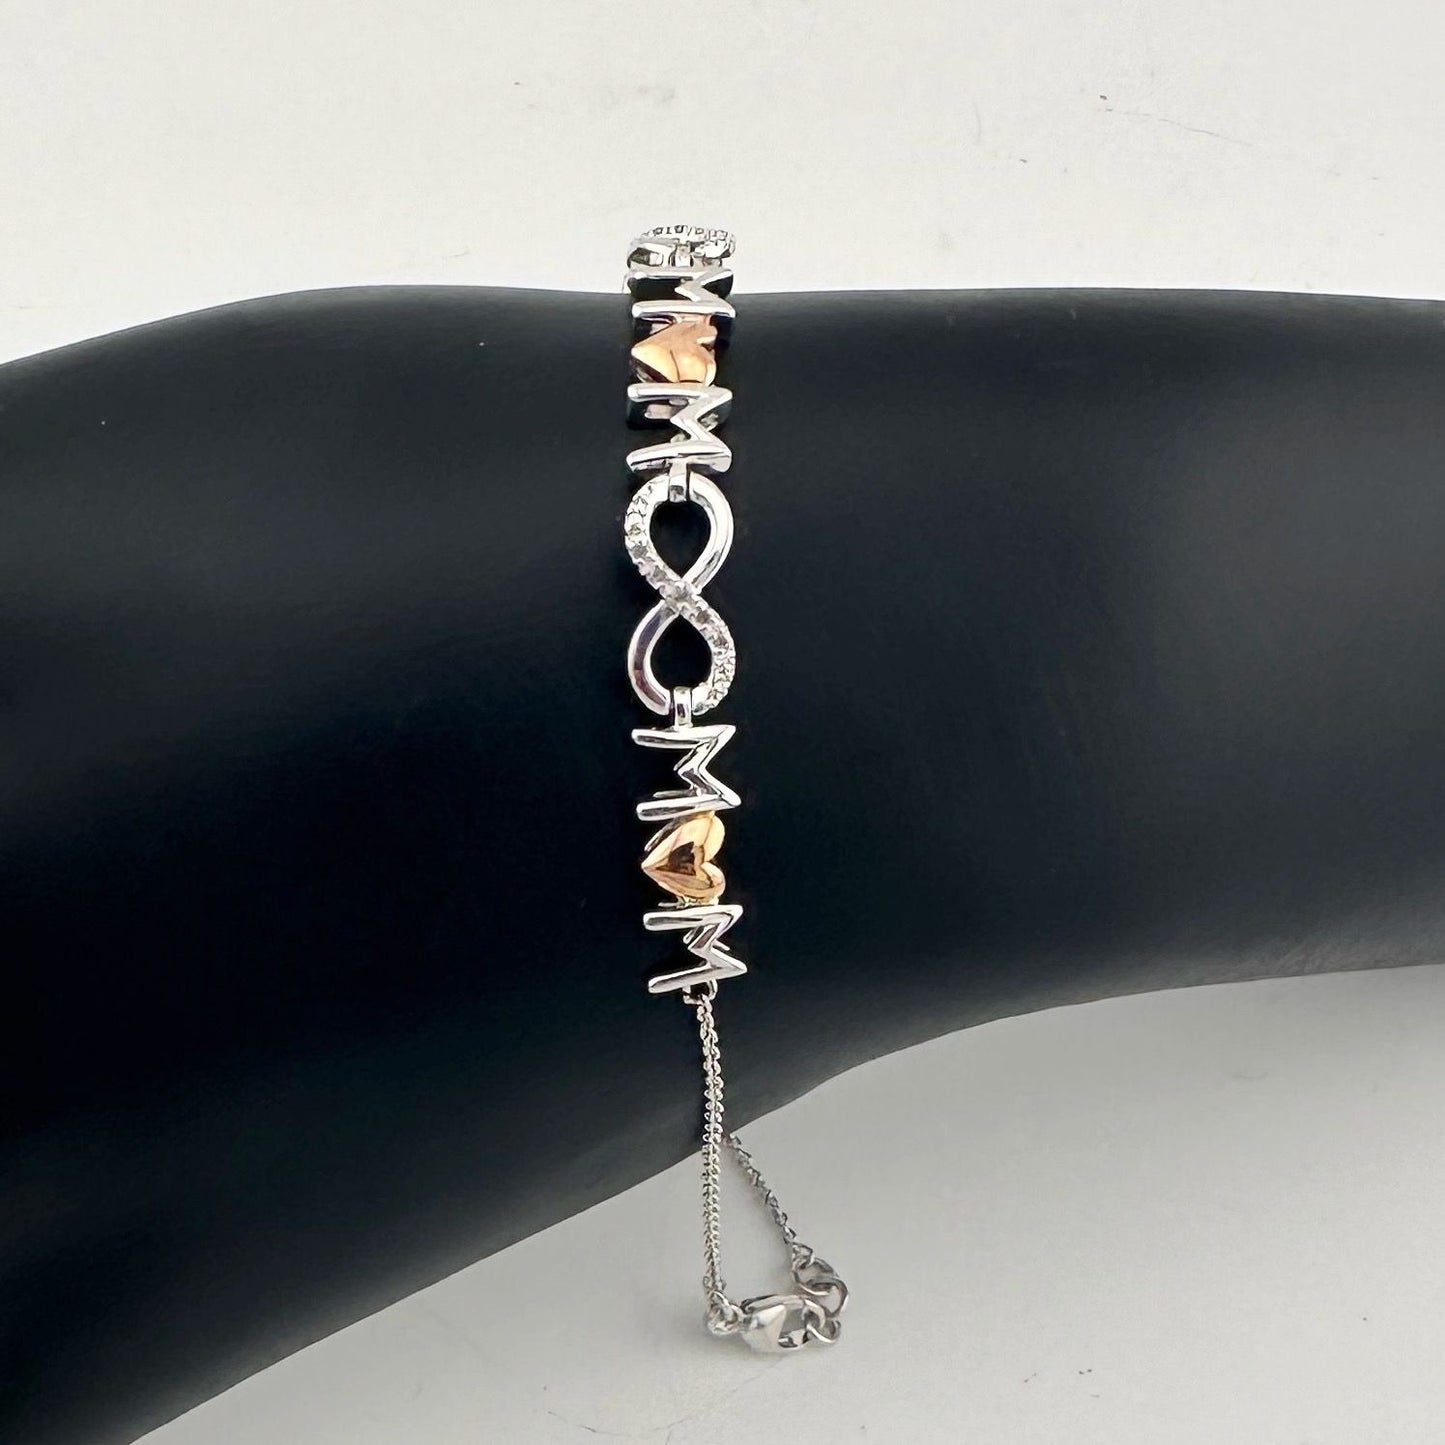 Sterling Silver "Mom" Bracelet with 14 kt gold Accent Hearts  & Infinity Symbols with Natural Diamonds